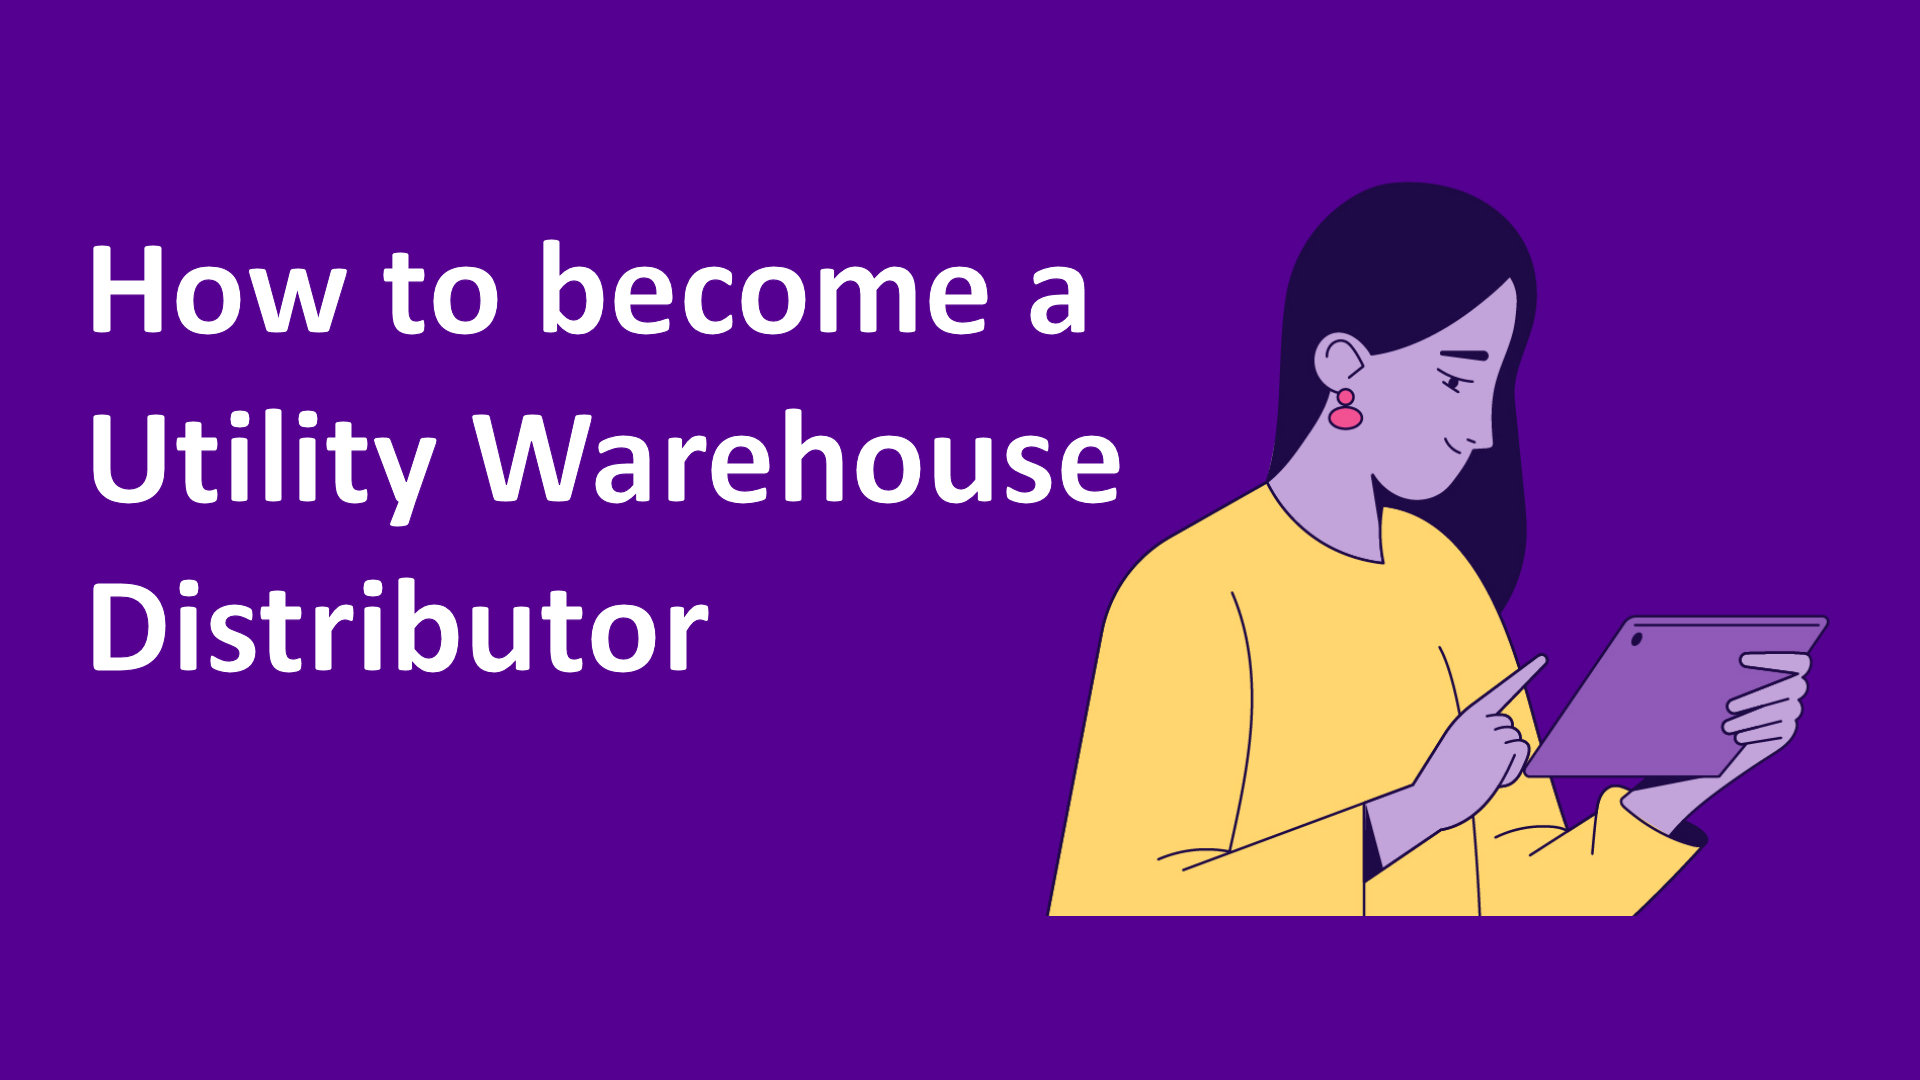 How to become a Utility Warehouse distributor